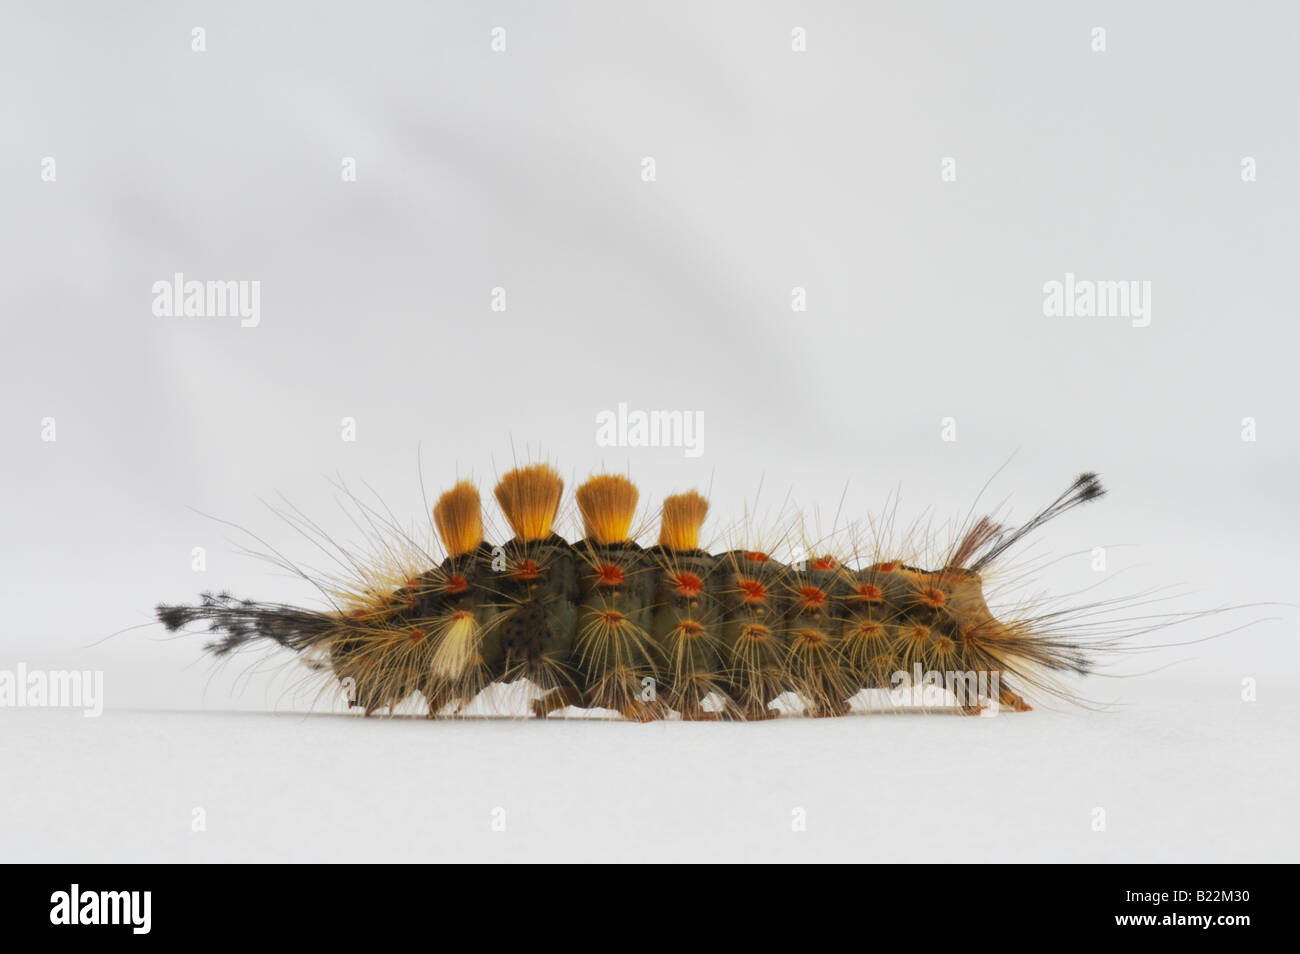 caterpillar of the vapourer moth Orgyia antiqua of the Lymantriidae family on a white background Stock Photo